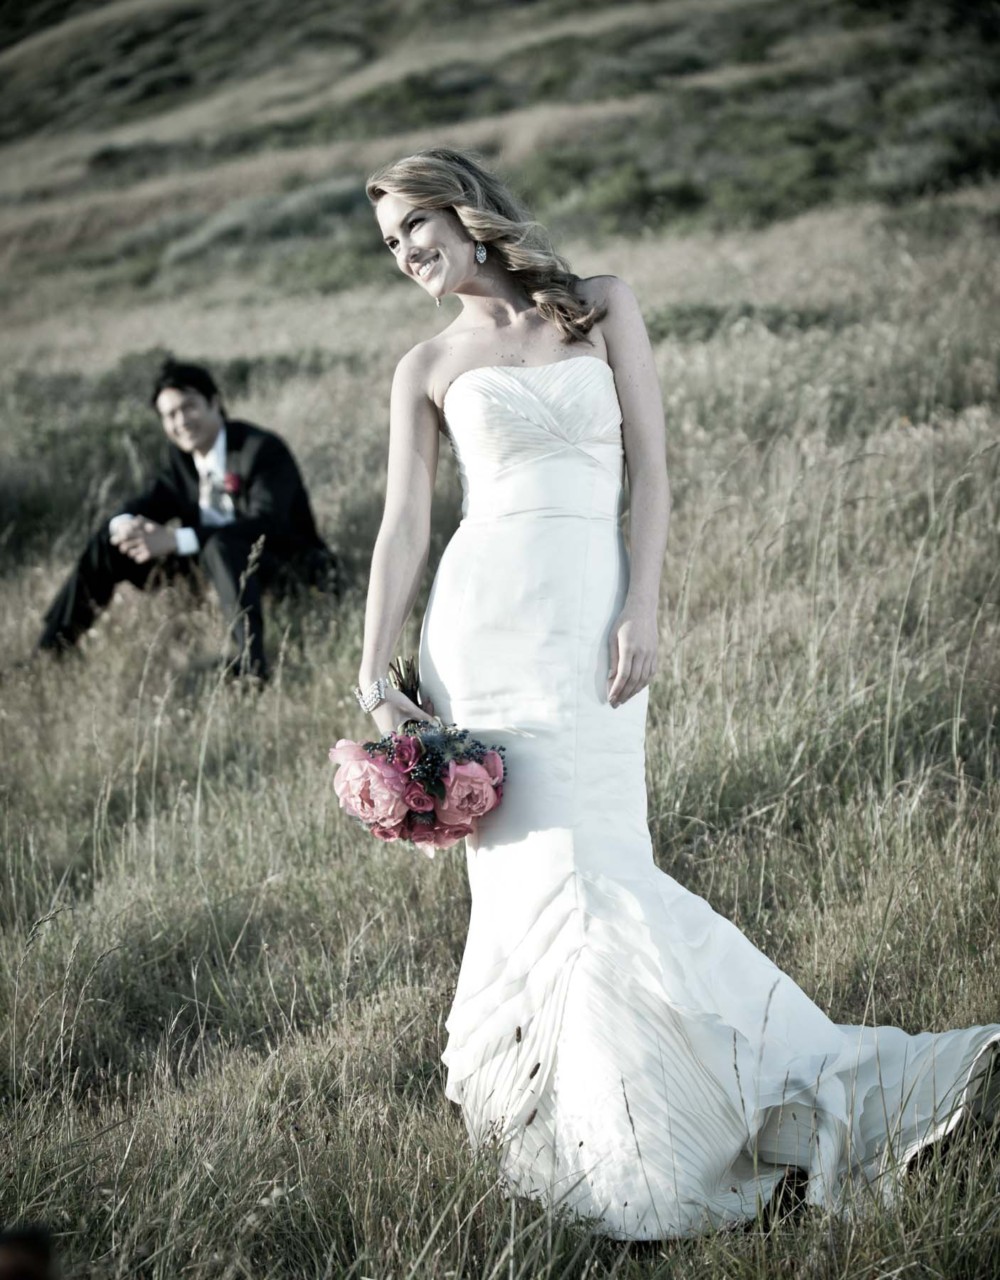 Looking for a local wedding photographer in Talkeetna?